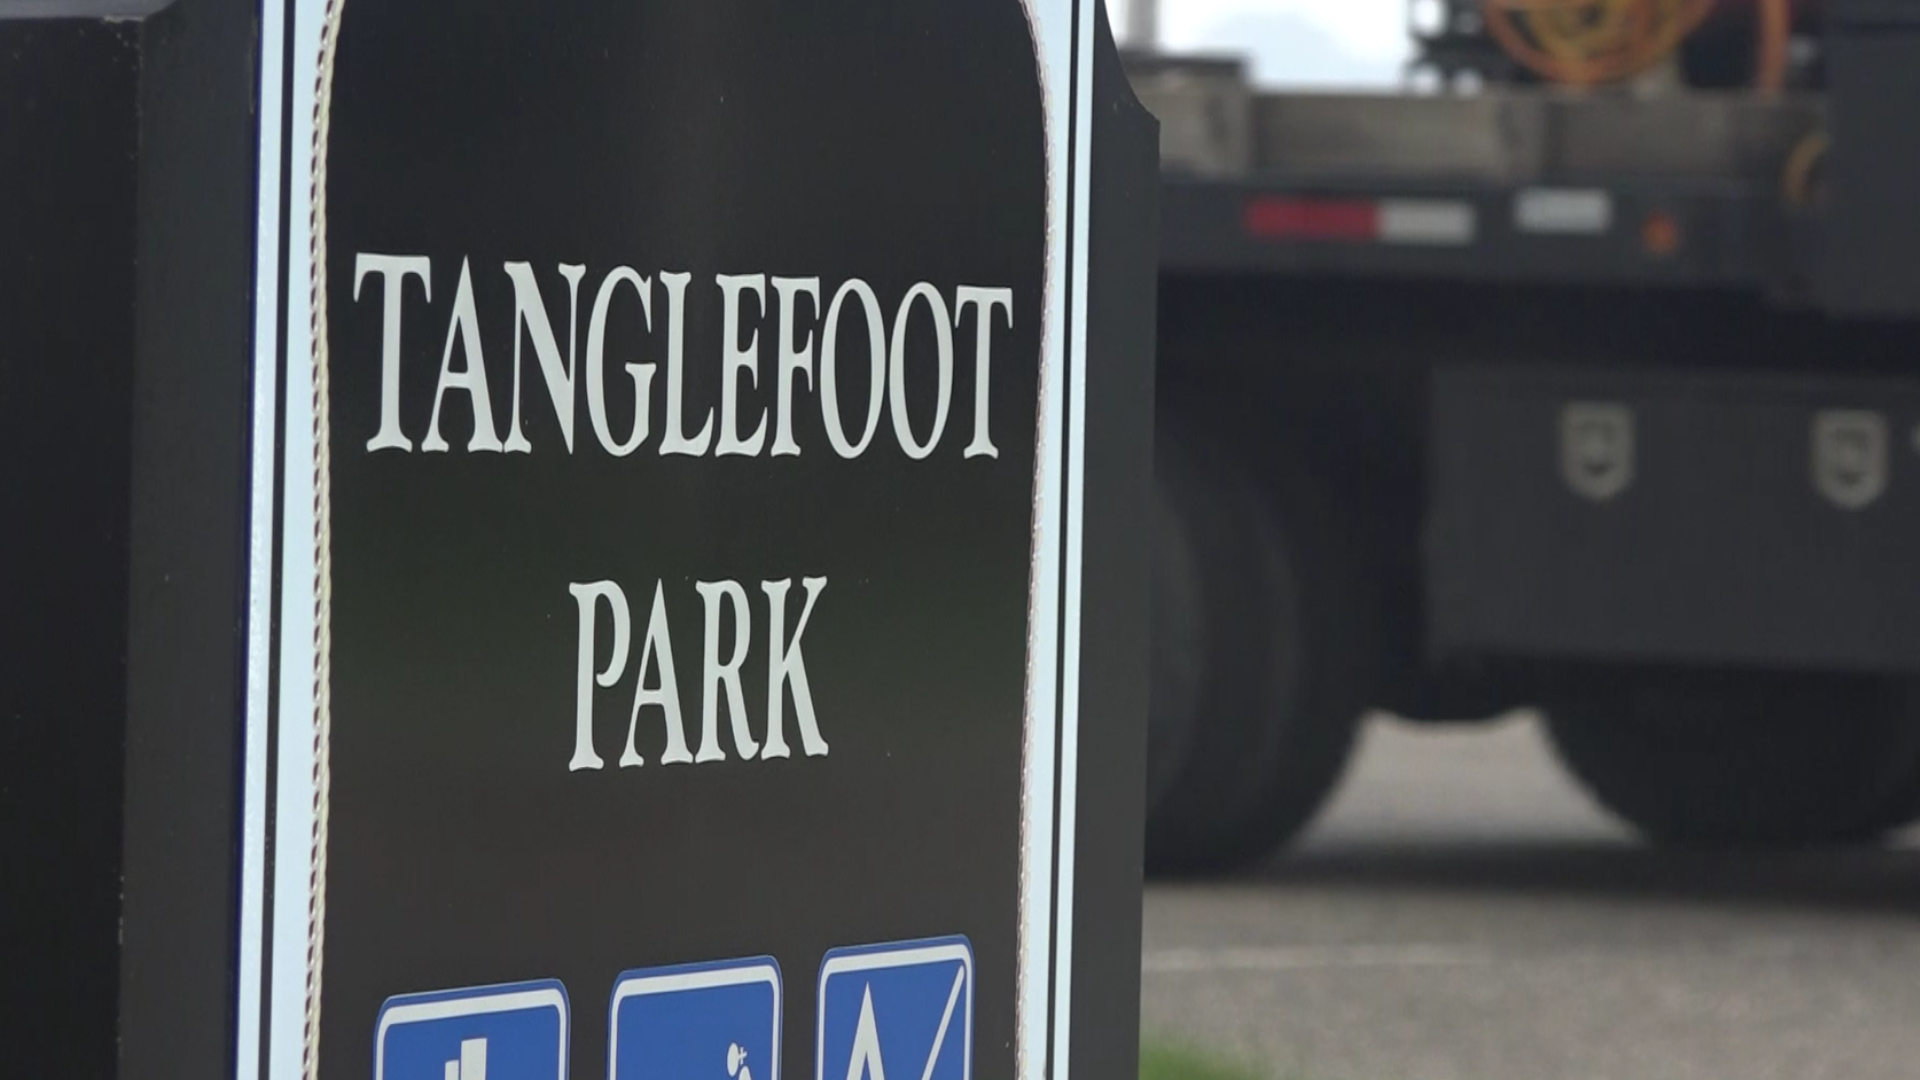 The redevelopment of the village of Spring Lake’s Tanglefoot Park is getting a big boost from two local residents who have pledged $1 million toward the project.